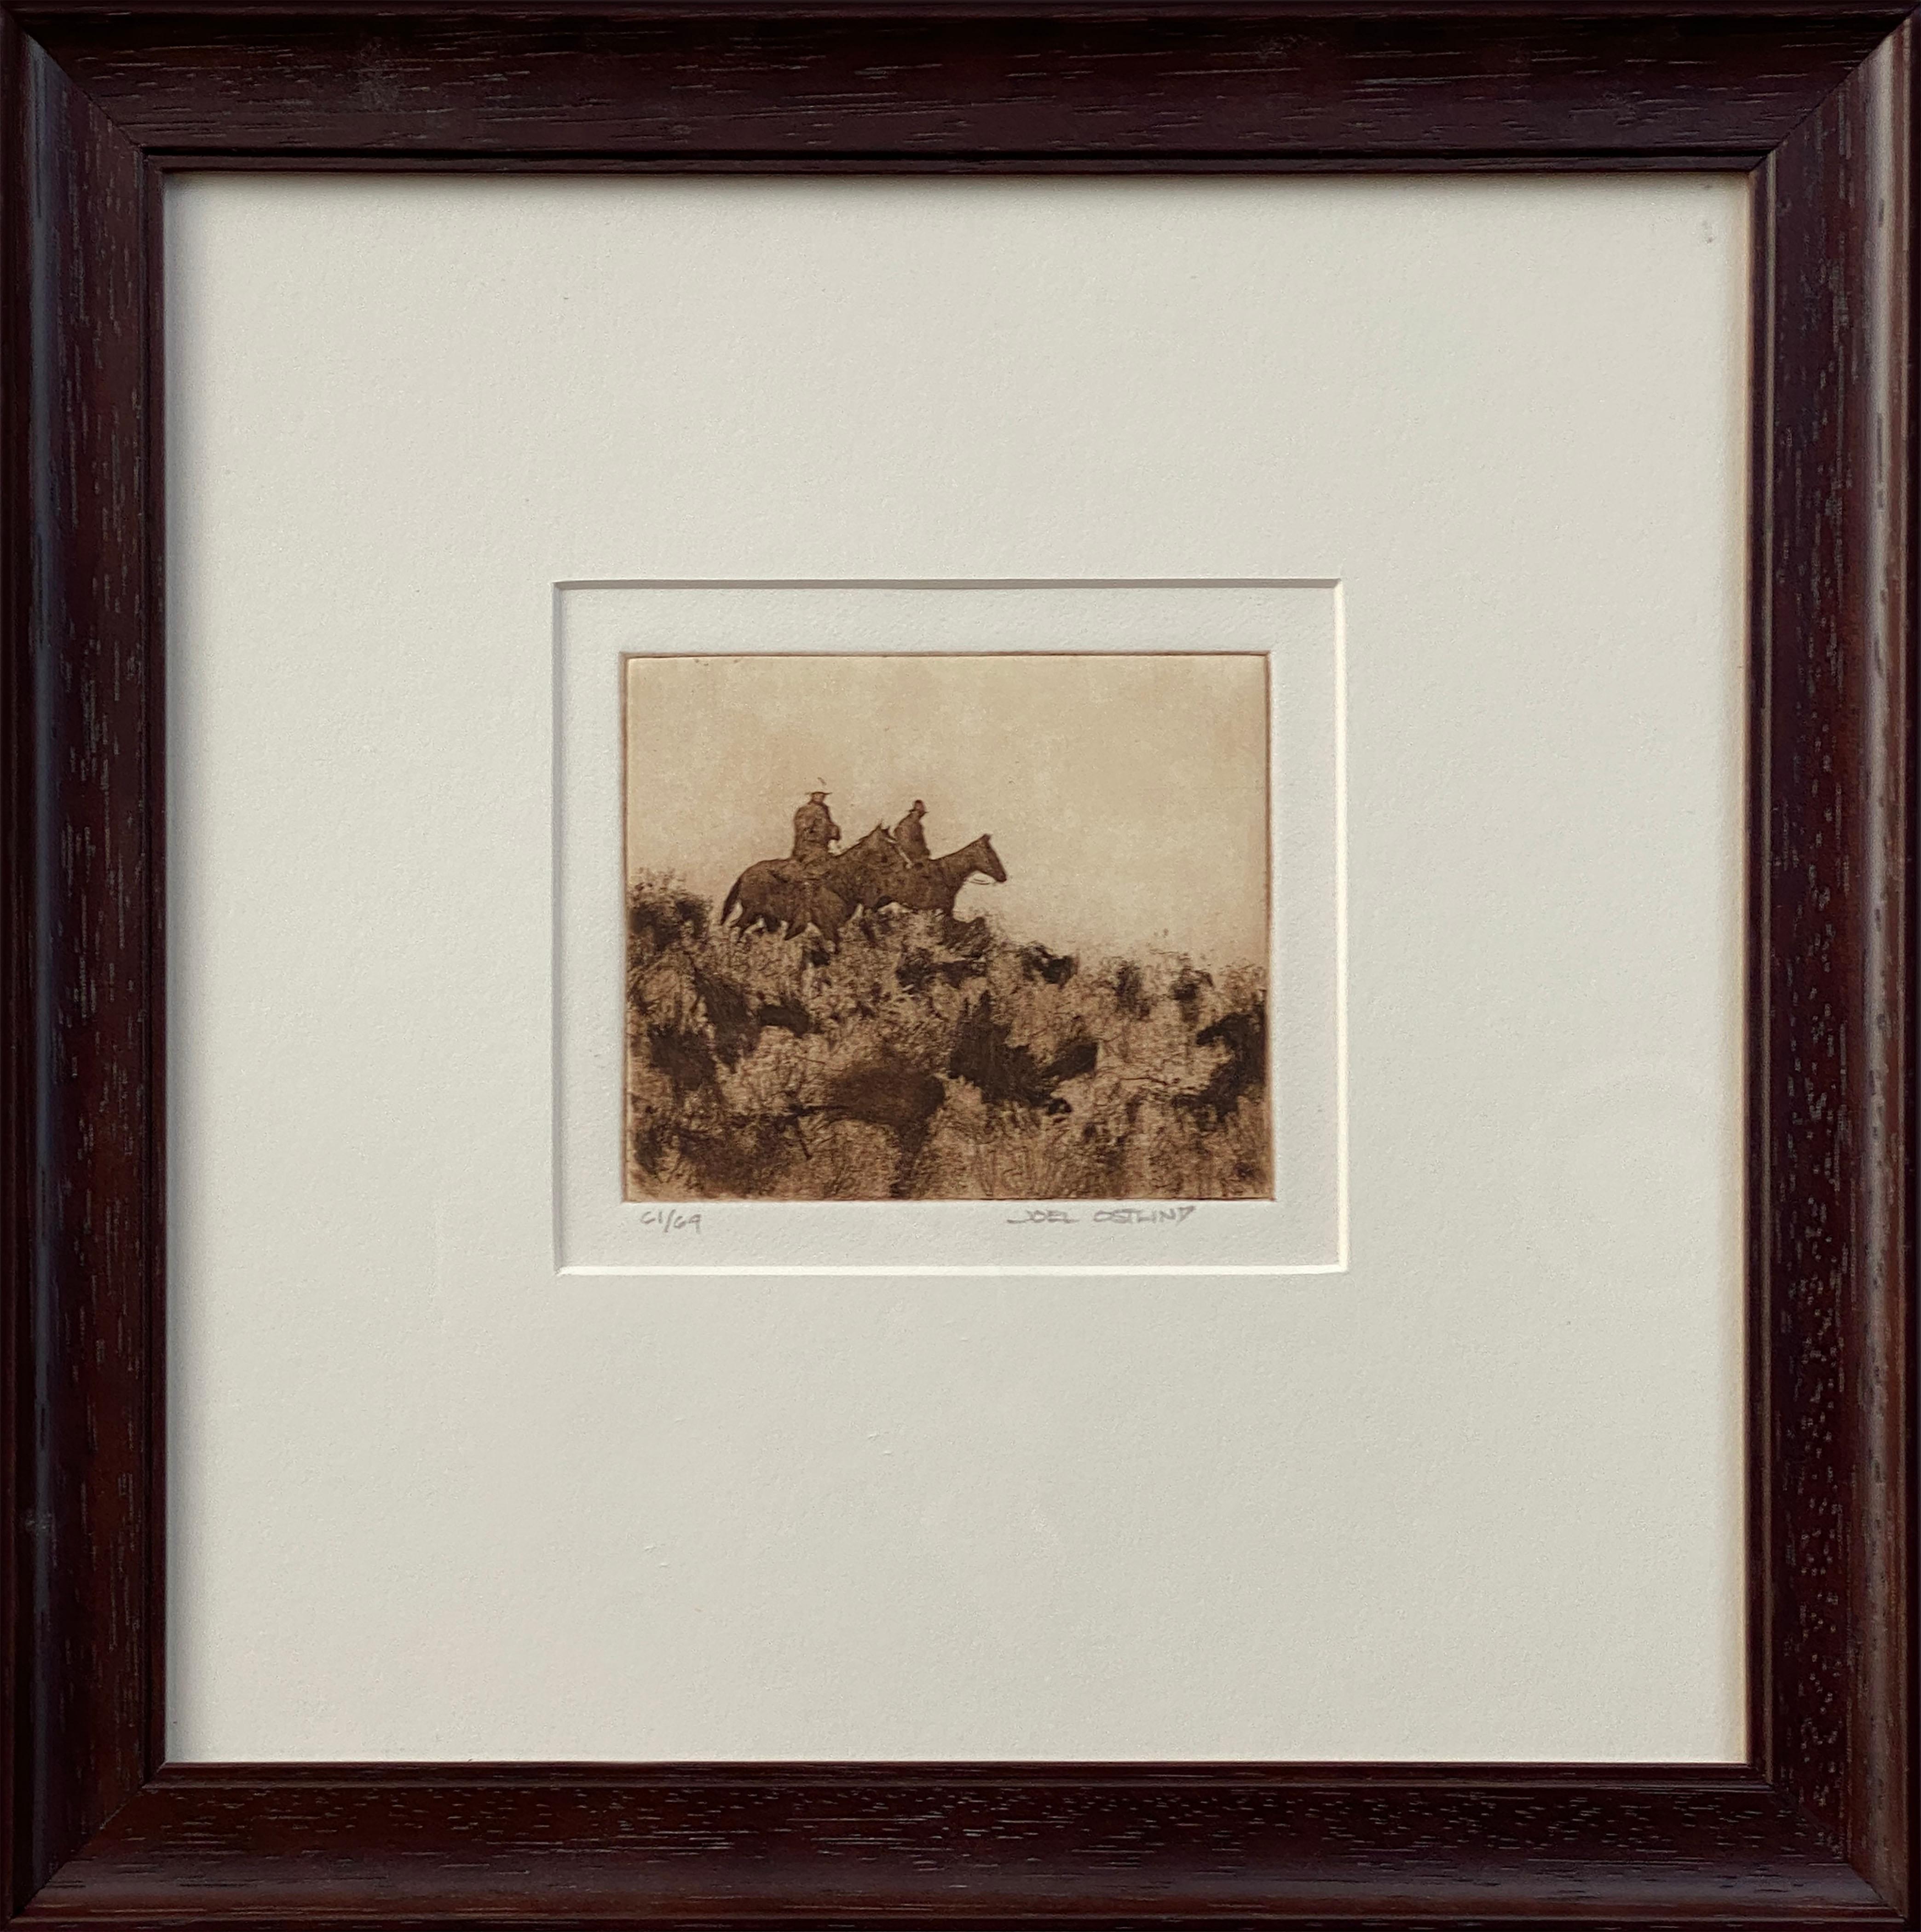 Through the Sage (cowboys, sage brush, antiqued finish, etching with aquatint) - Print by Leon Loughridge